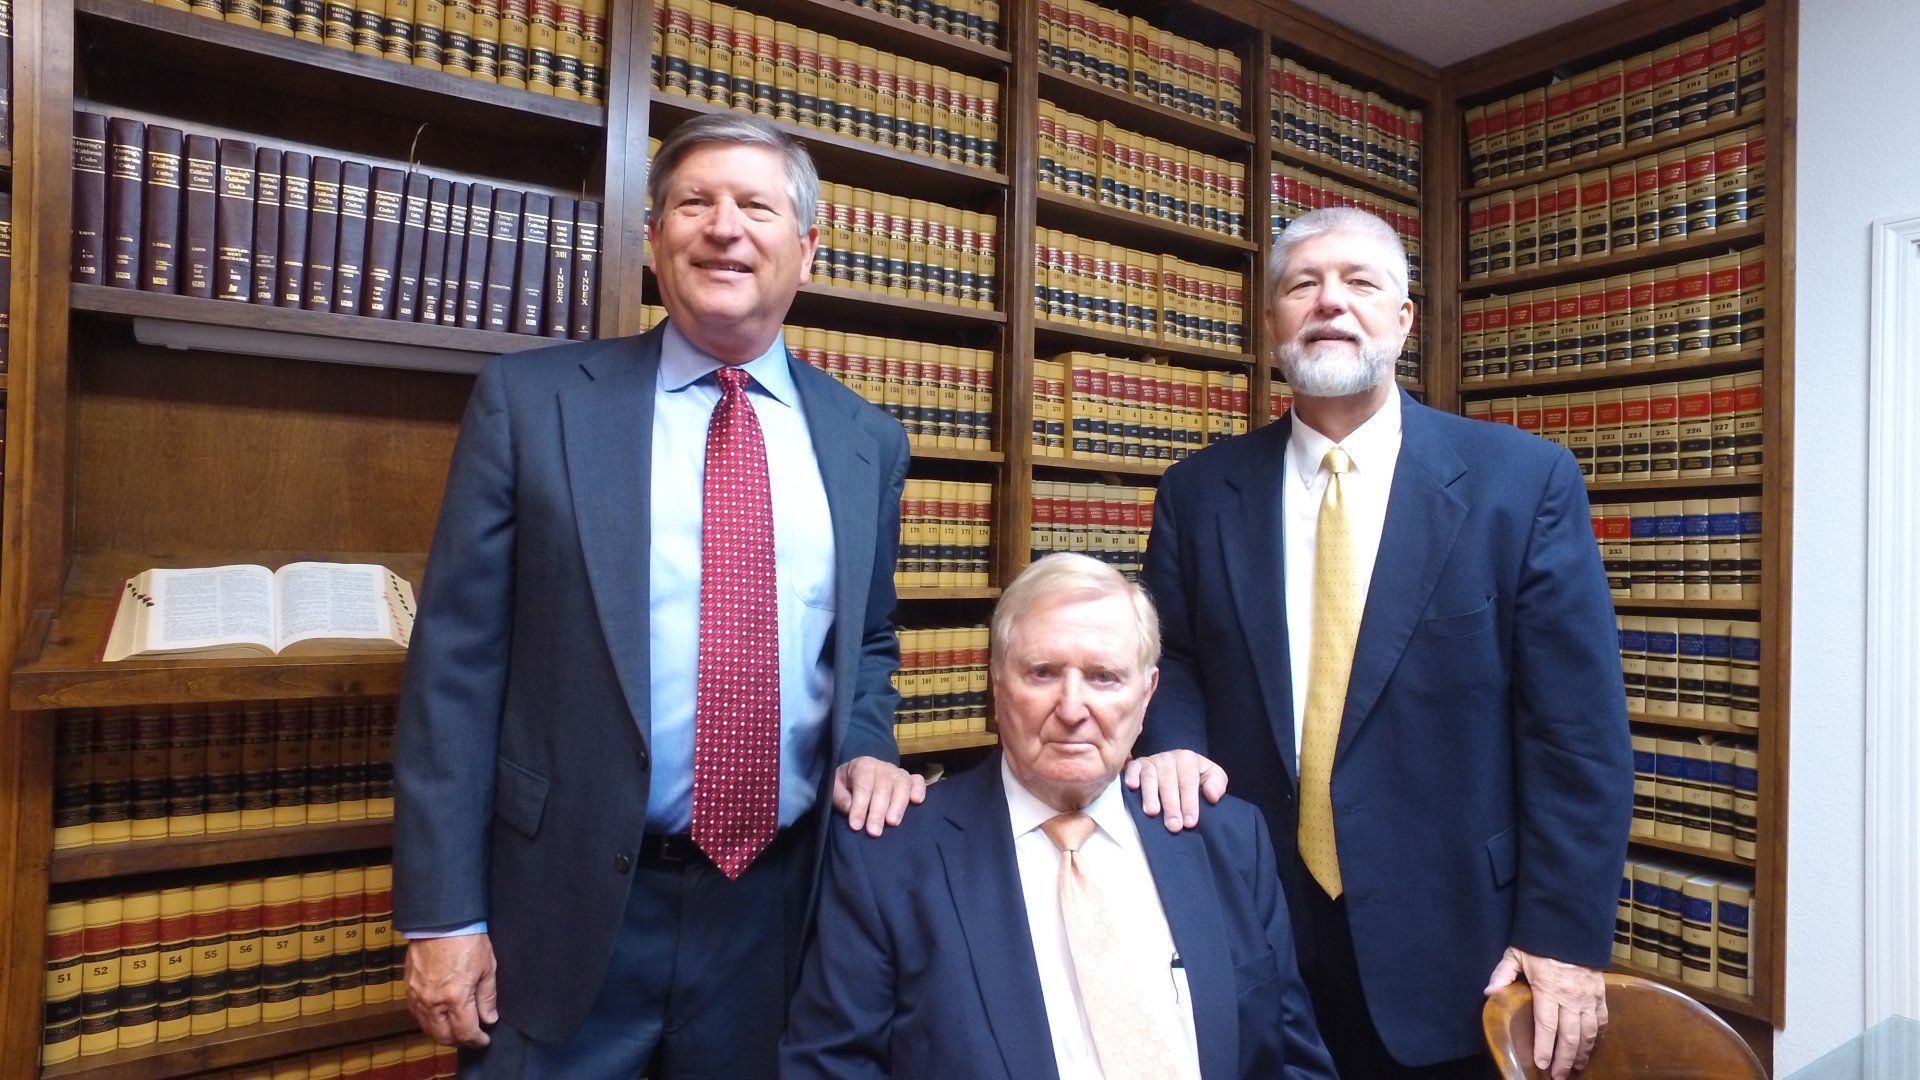 Photograph of the Picking Law corporation attorneys in the Pickering Law office library 